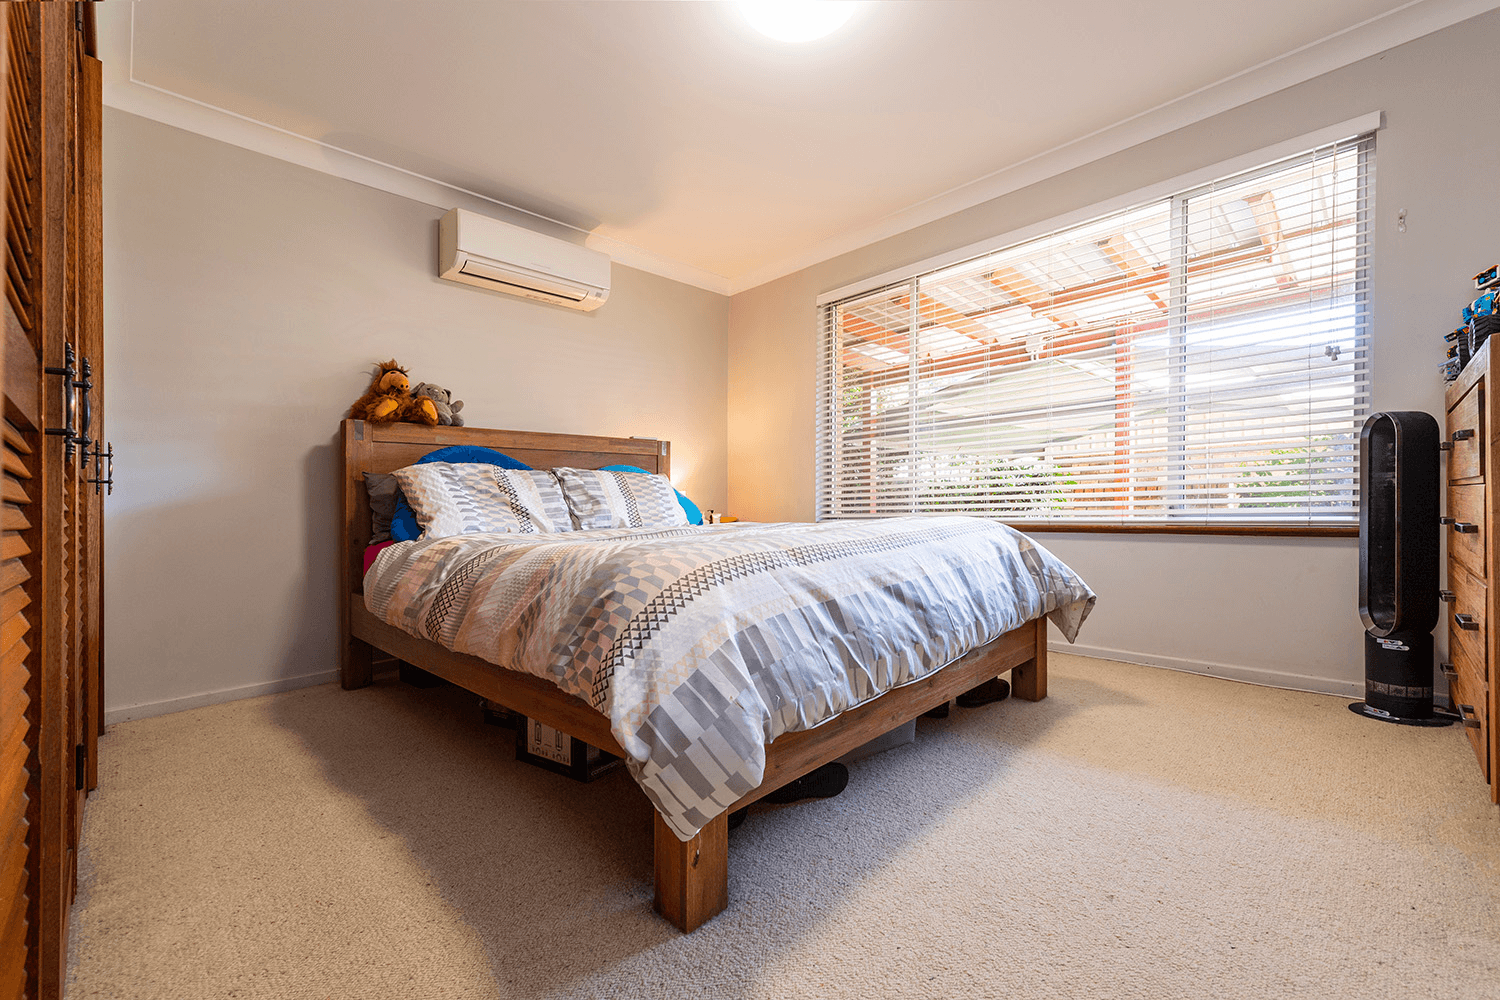 15 Cook Street, Scone, NSW 2337